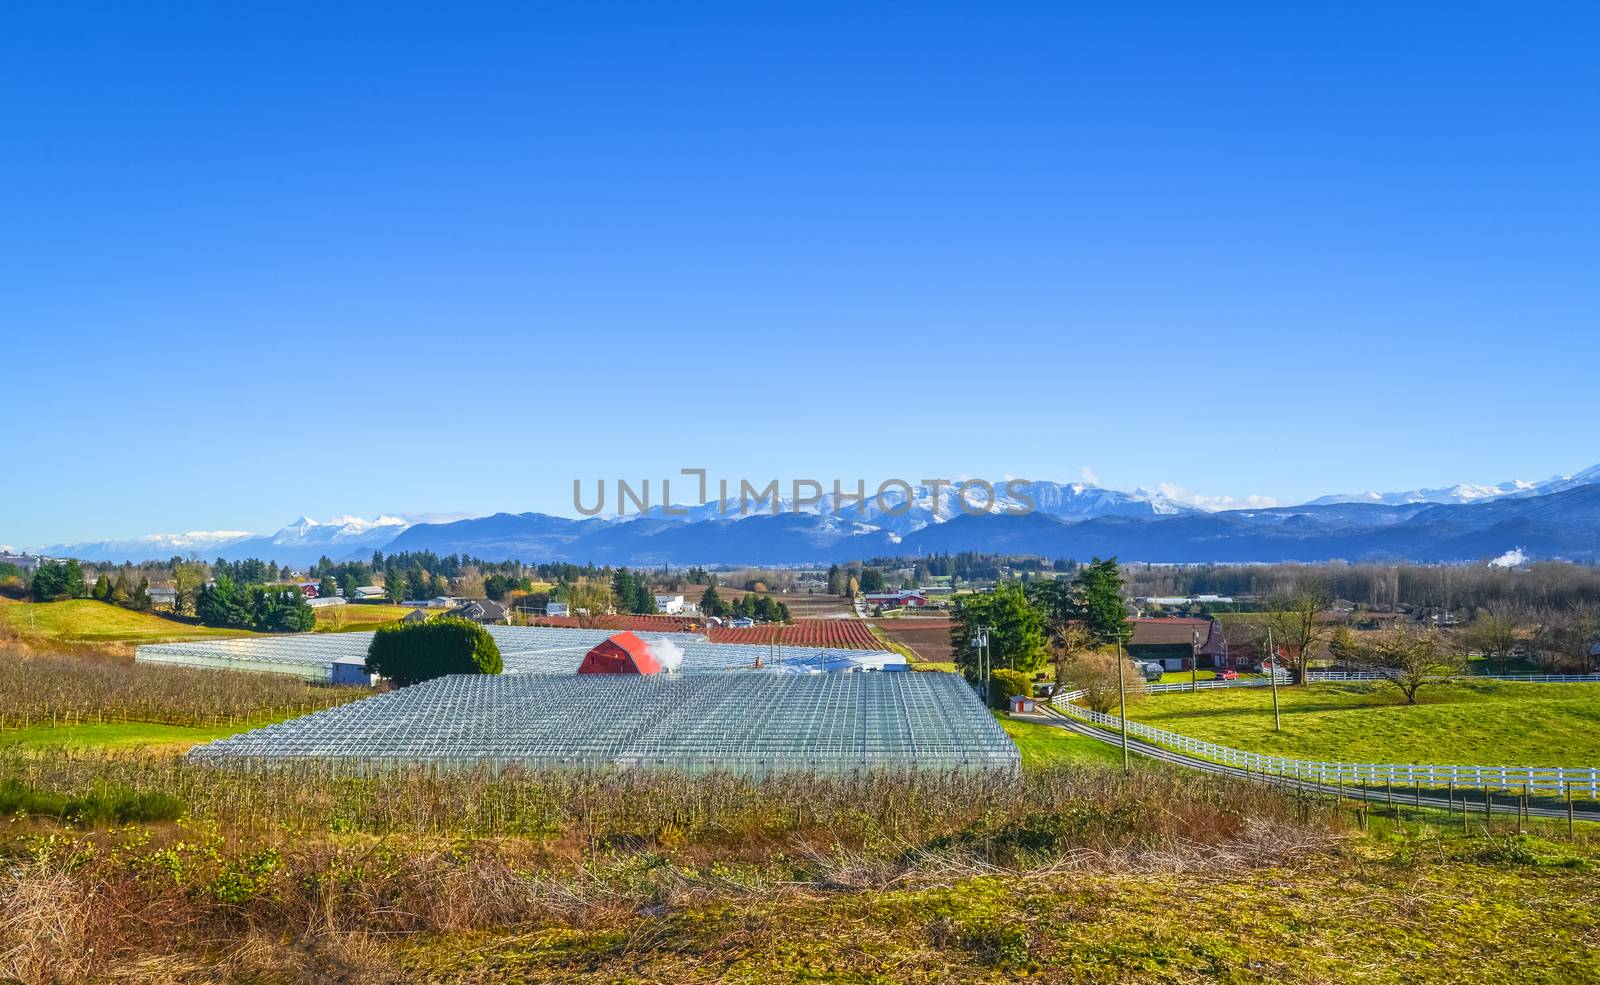 Winter season on fruit farm in a valley. View on a valley with mountain ridge on blue sky background